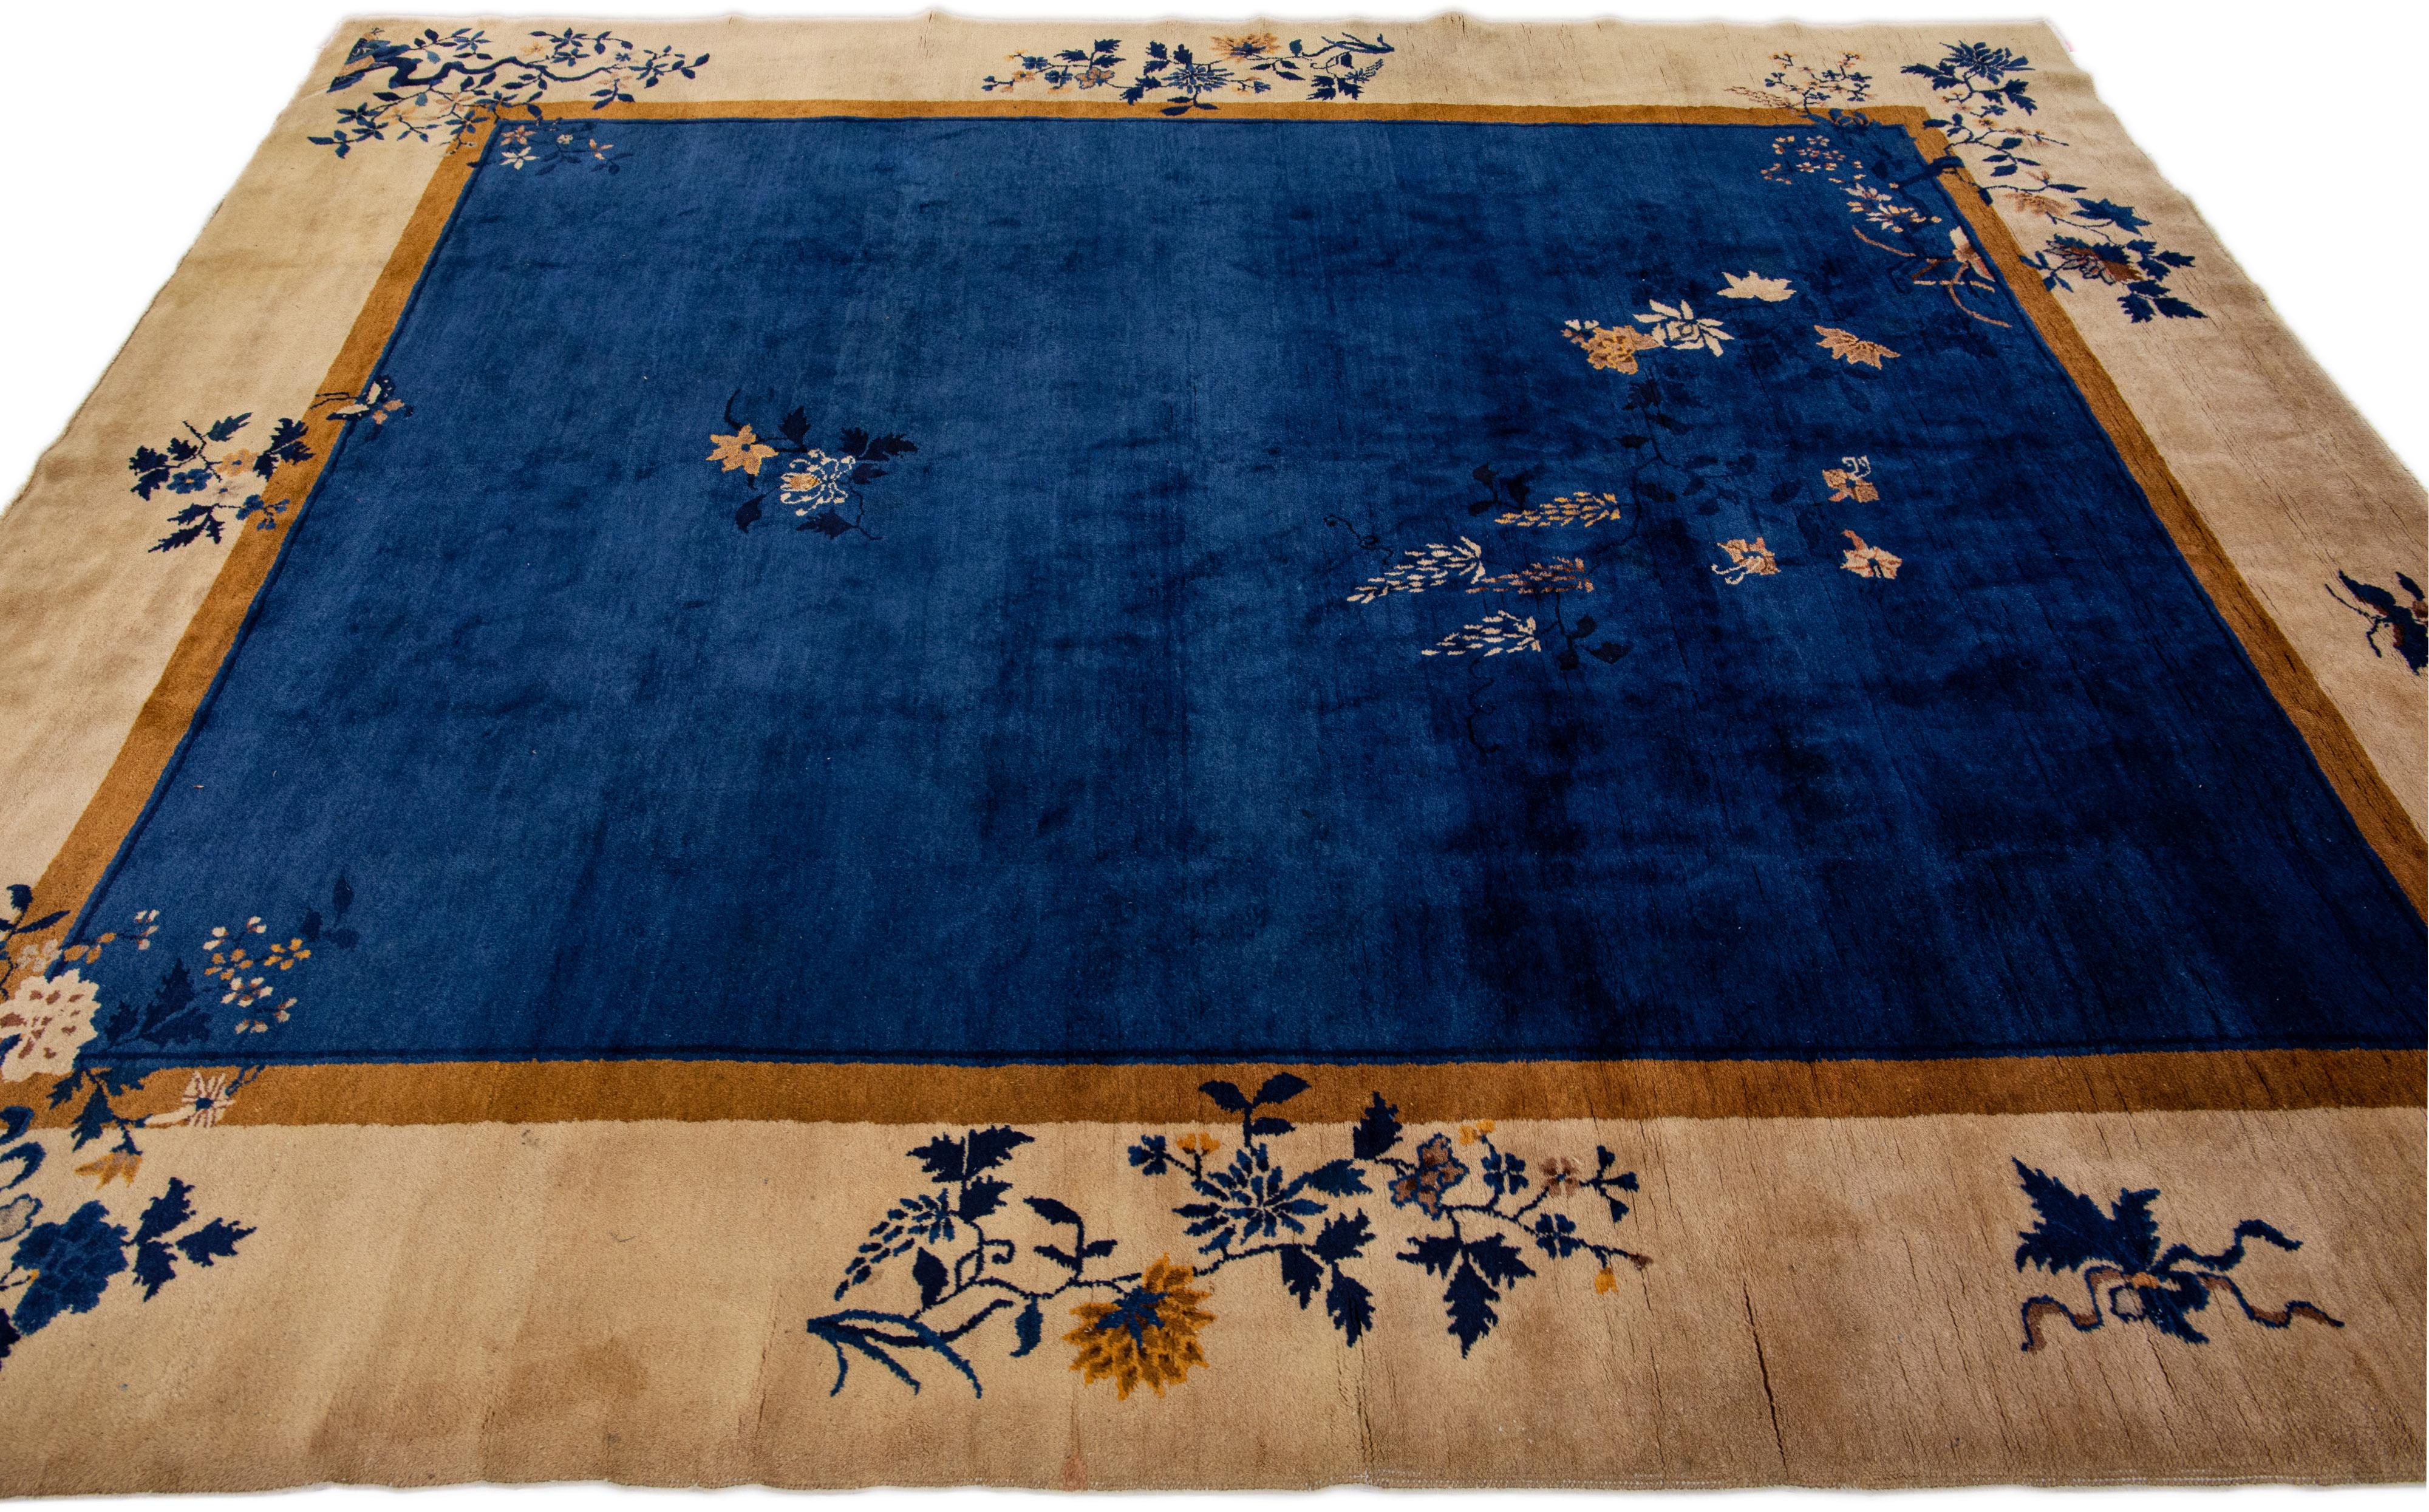 20th Century Antique Art Deco Handmade Beige and Blue Chinese Wool Rug with Floral Design For Sale